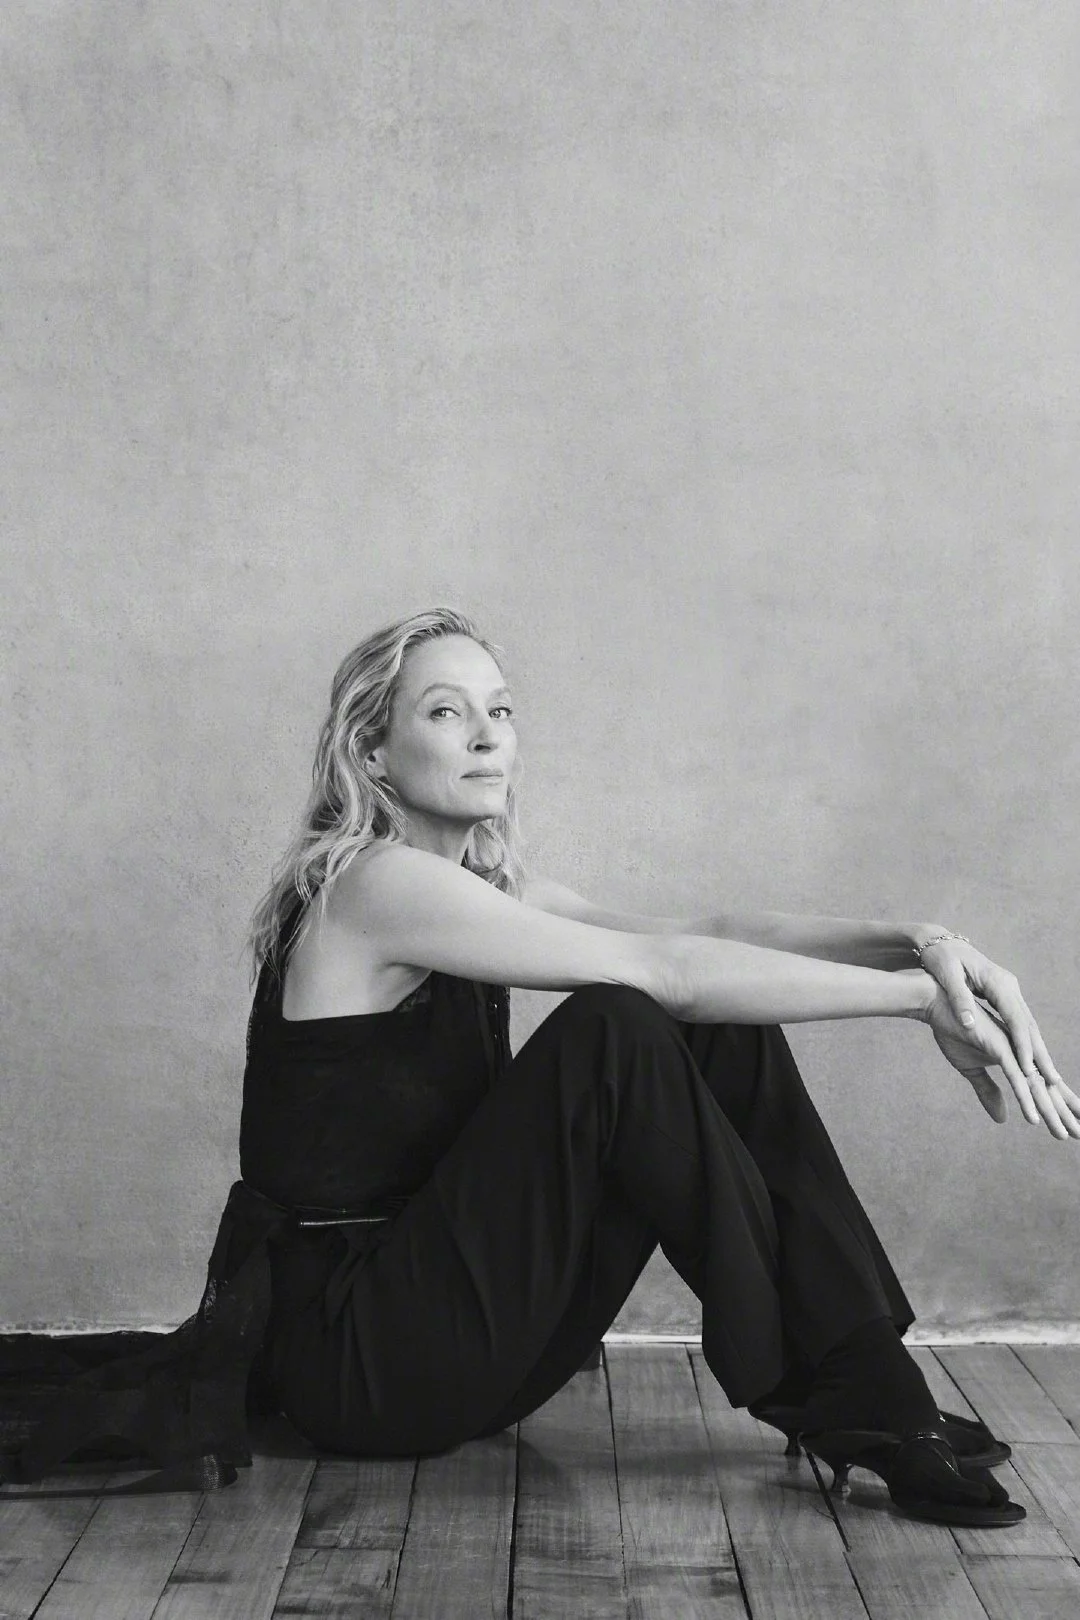 Uma Thurman, photo of the March issue of Vogue Spain ​​​